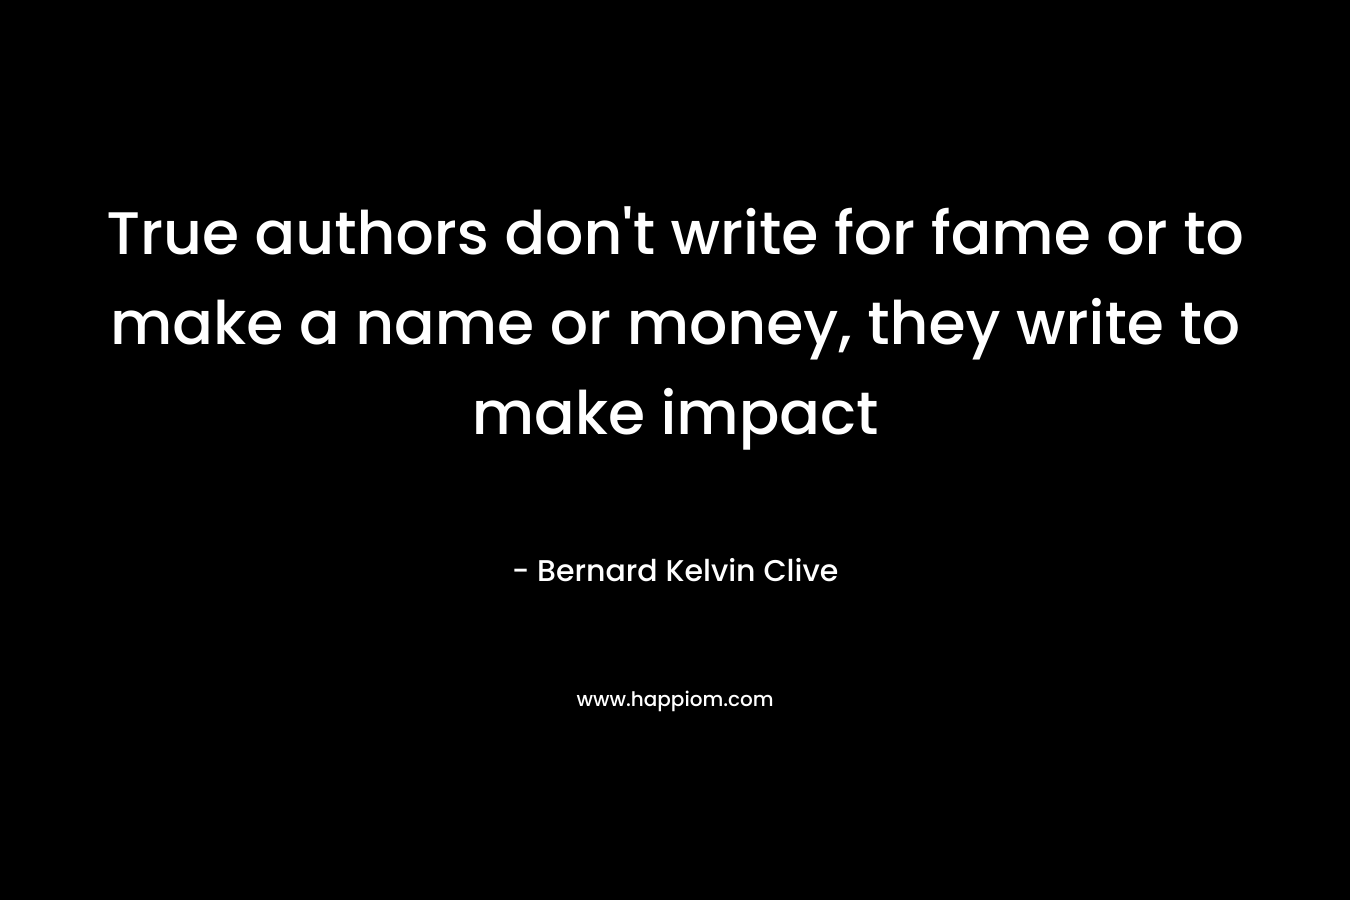 True authors don’t write for fame or to make a name or money, they write to make impact – Bernard Kelvin Clive